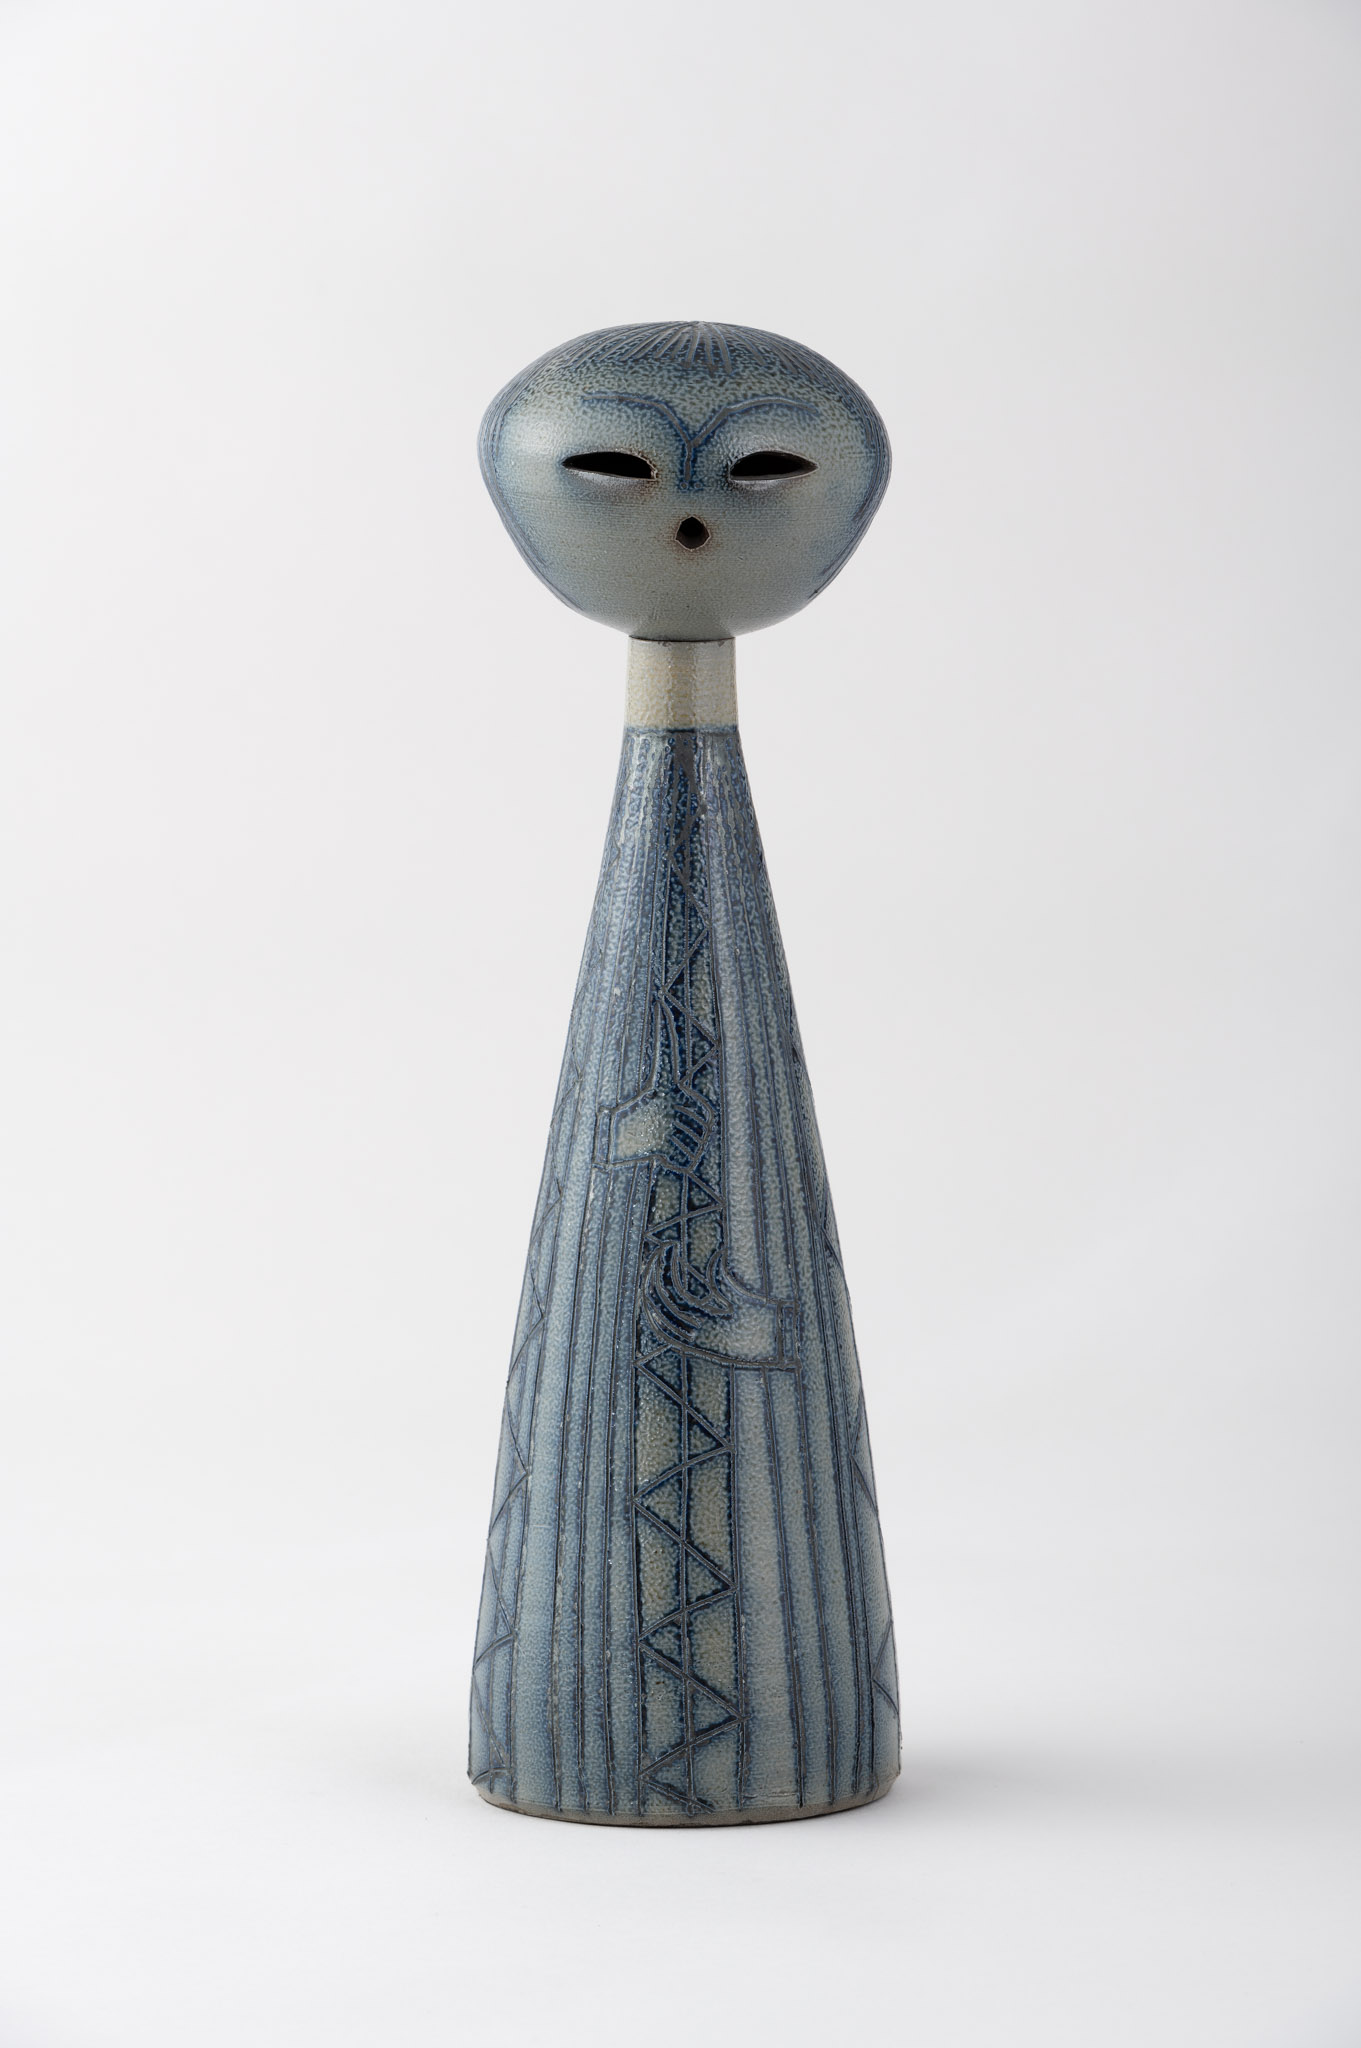 Designed by HINENO Sakuzo, Kokeshi-Shaped Vase, 1961, Aichi Center for Industry and Science Technology, Tokoname Ceramic Research Institute